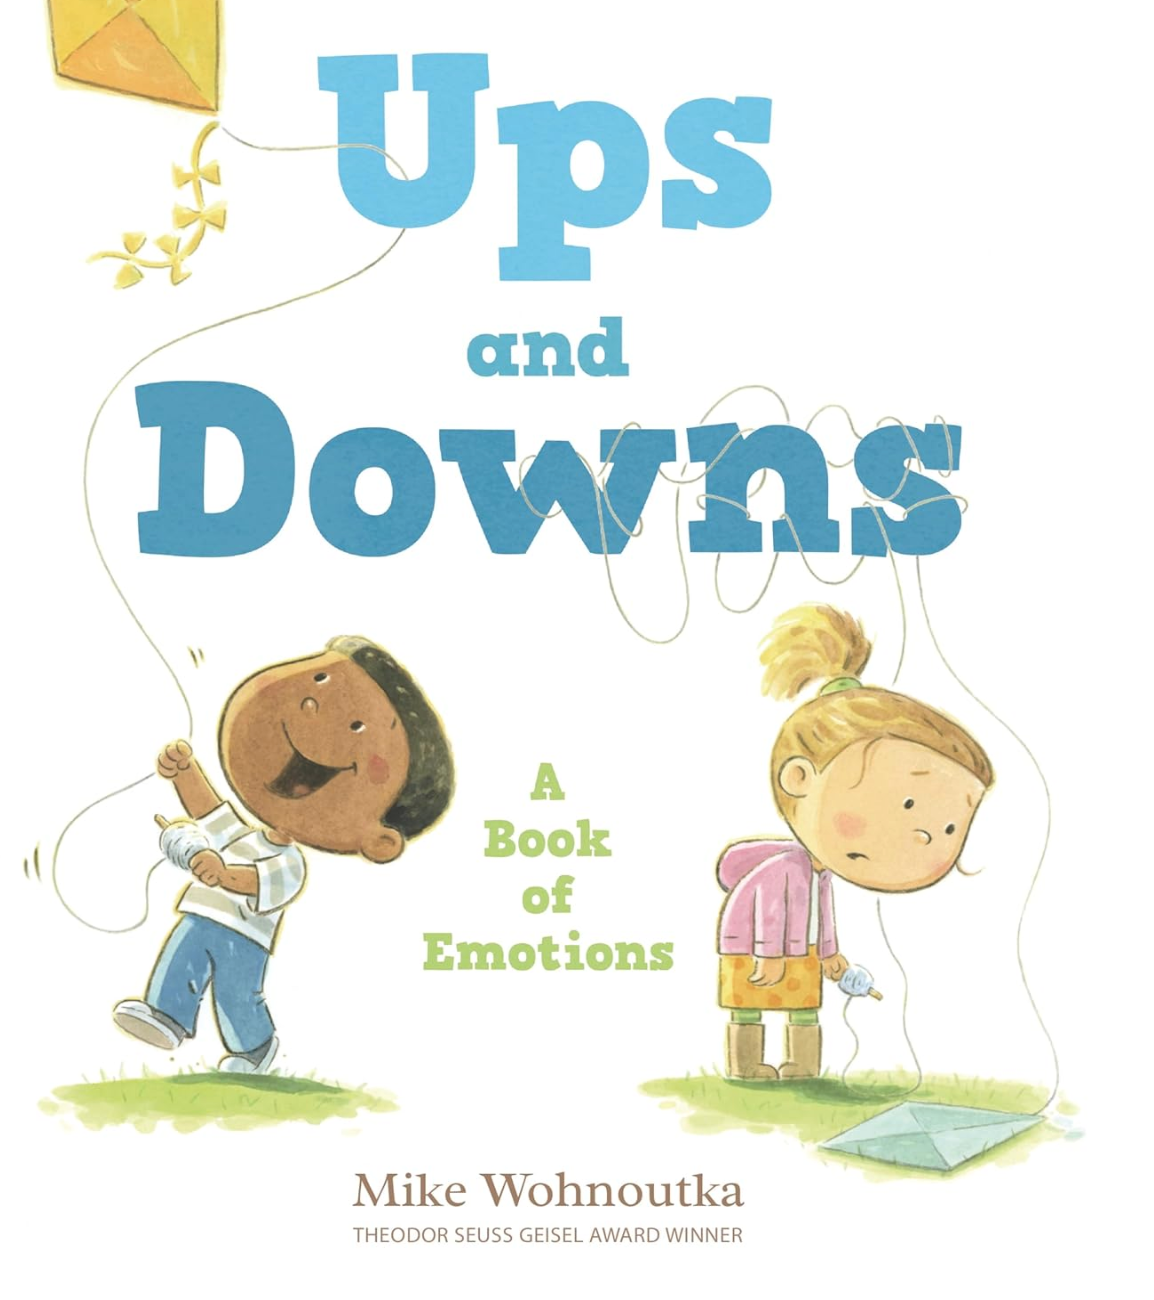 Ups and Downs: A Book of Emotions